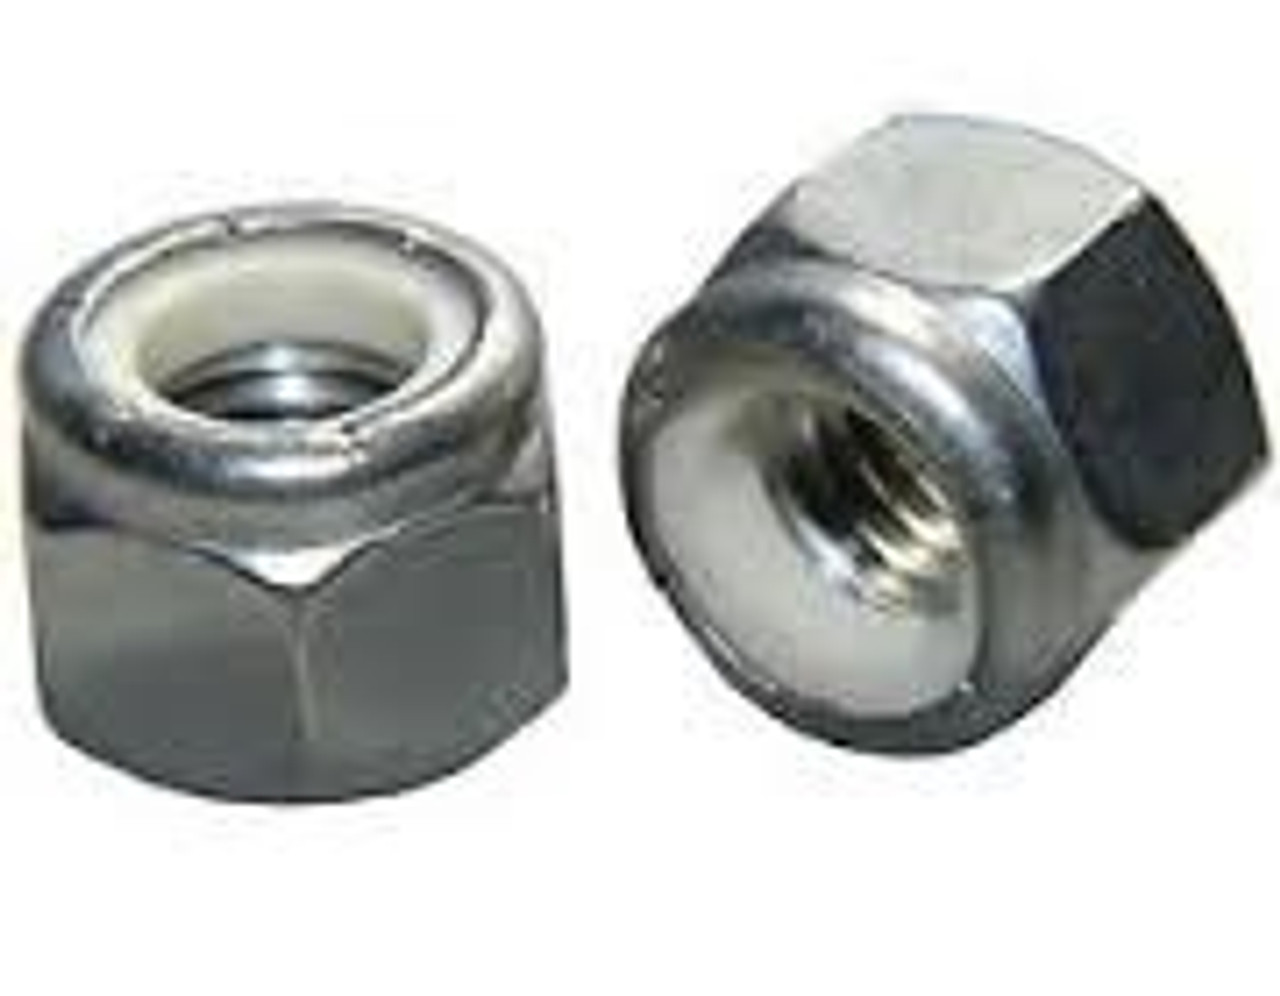 Details about   New Flyer Nut Lock Nylon 1-1/4" 12 UNF 41N20000 Repair Replacement Part 